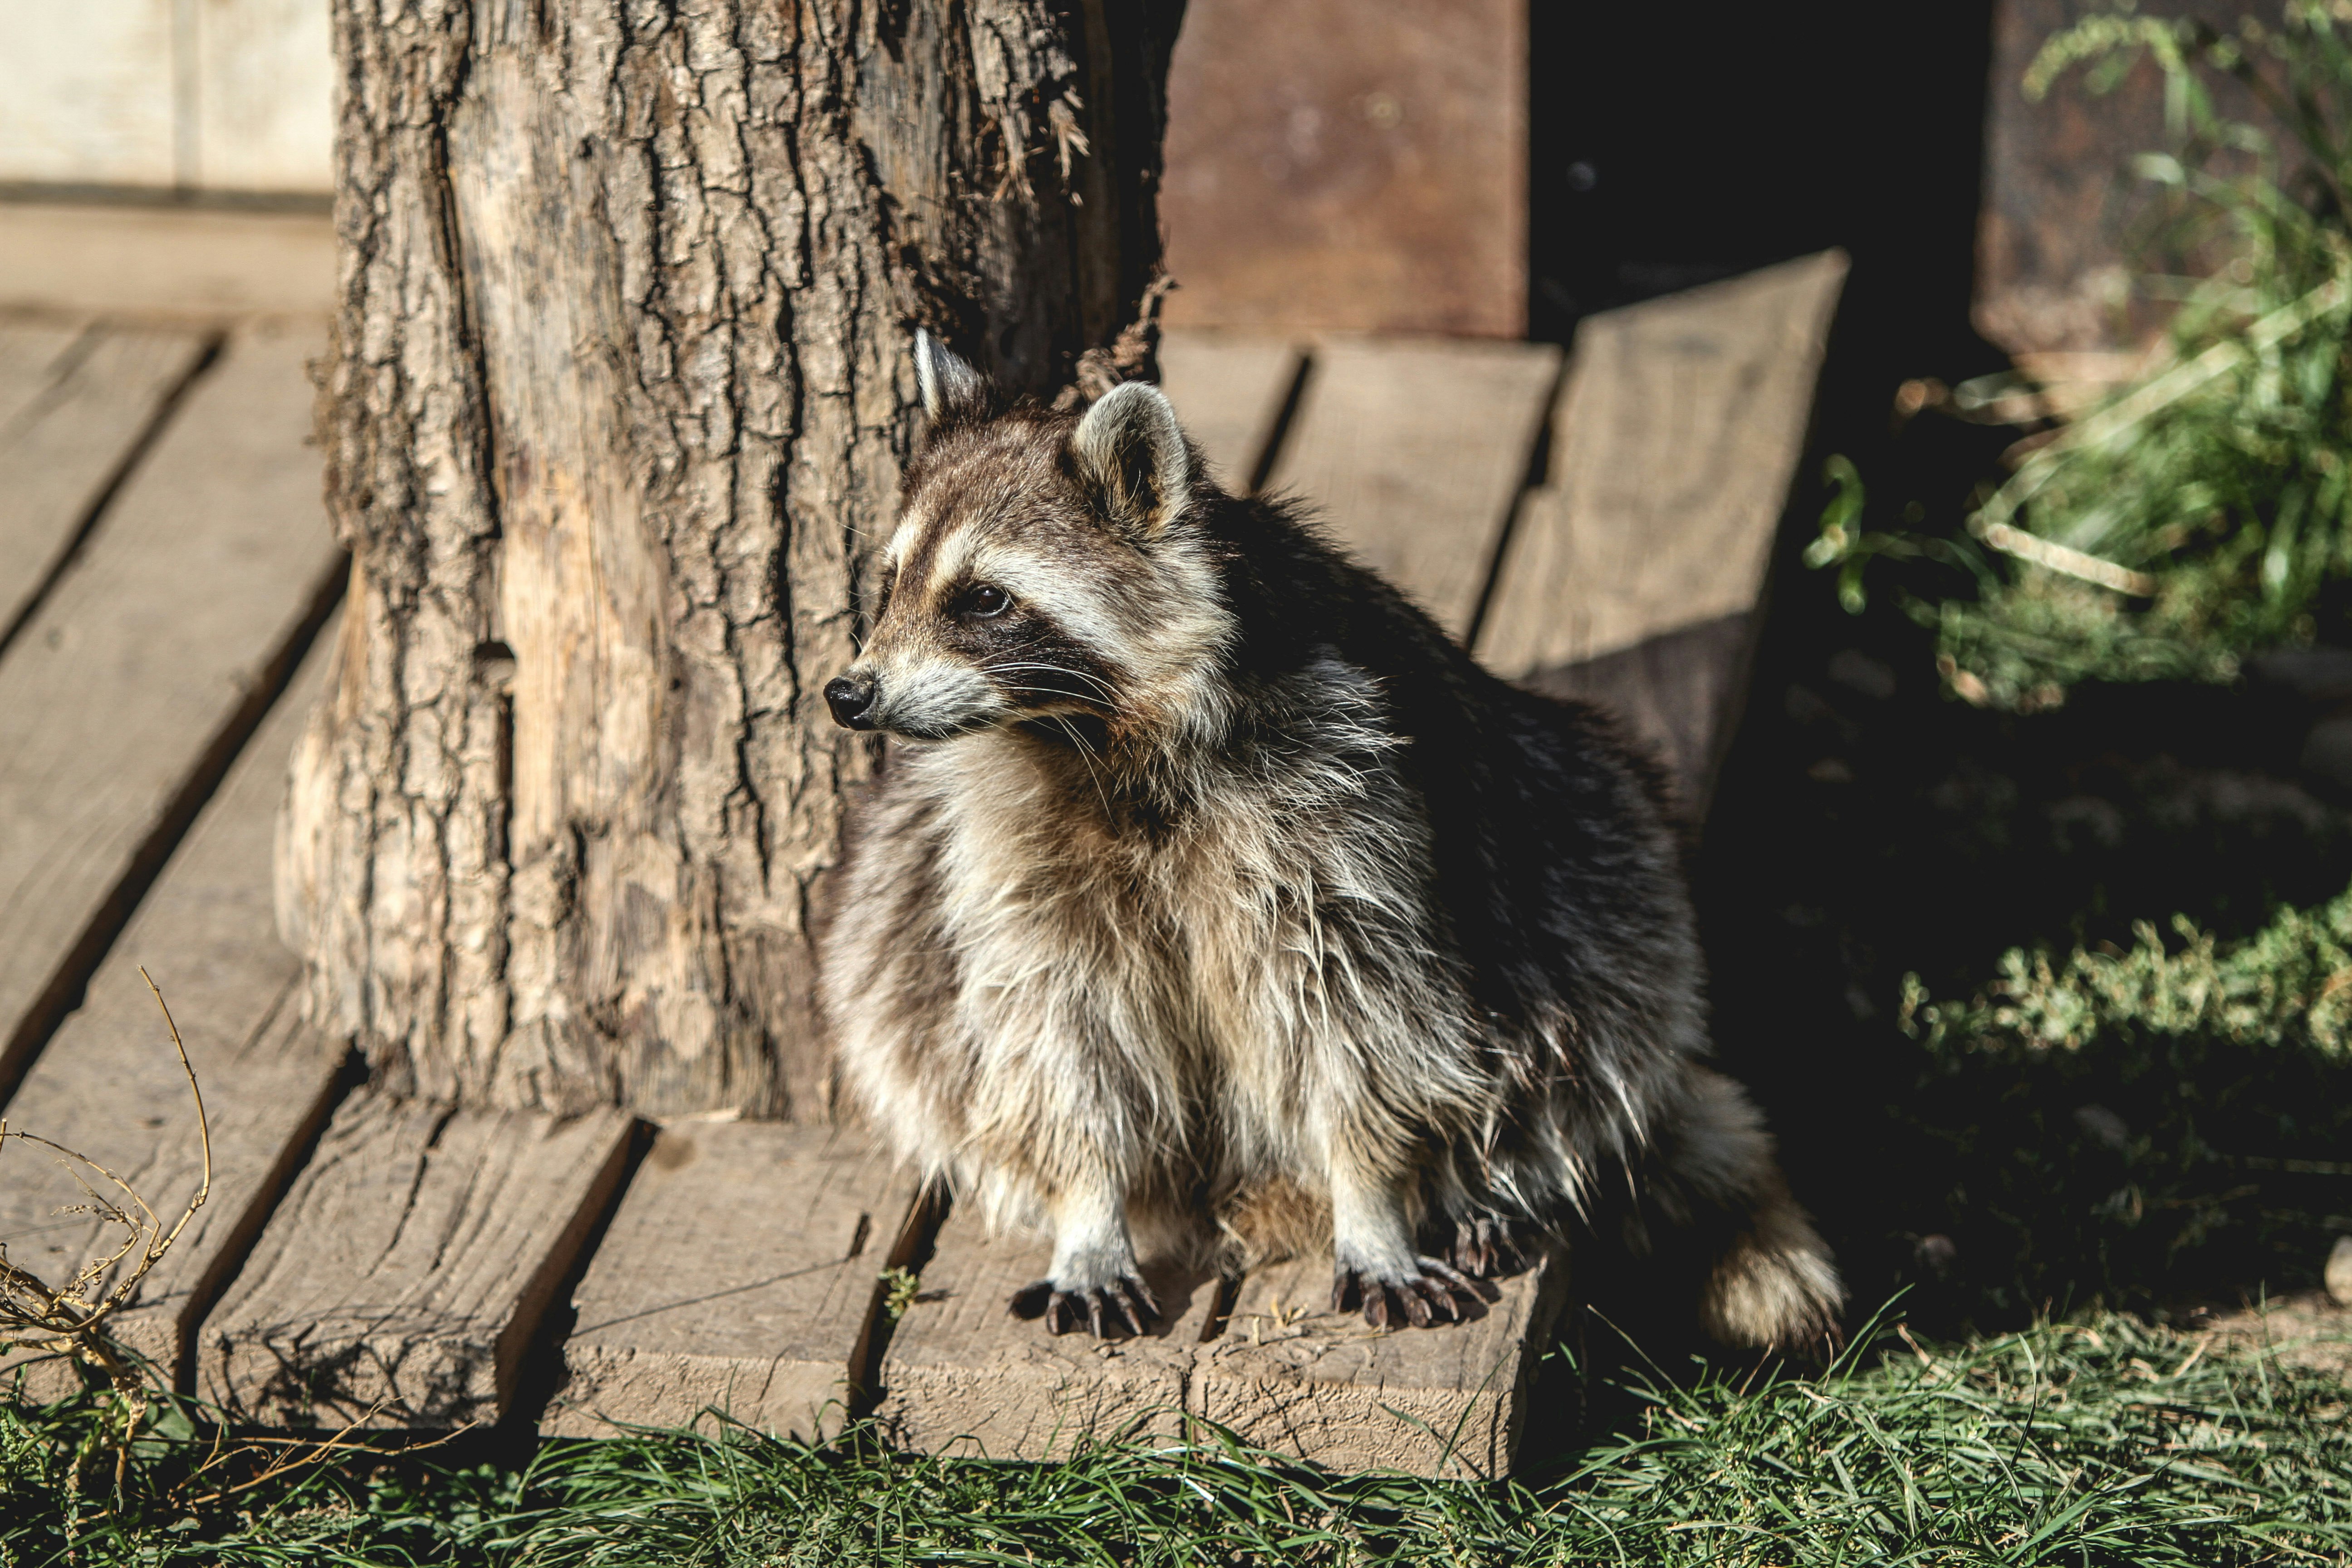 Lazy rocky racoon before the sunset at Parc de Sainte Croix in France.